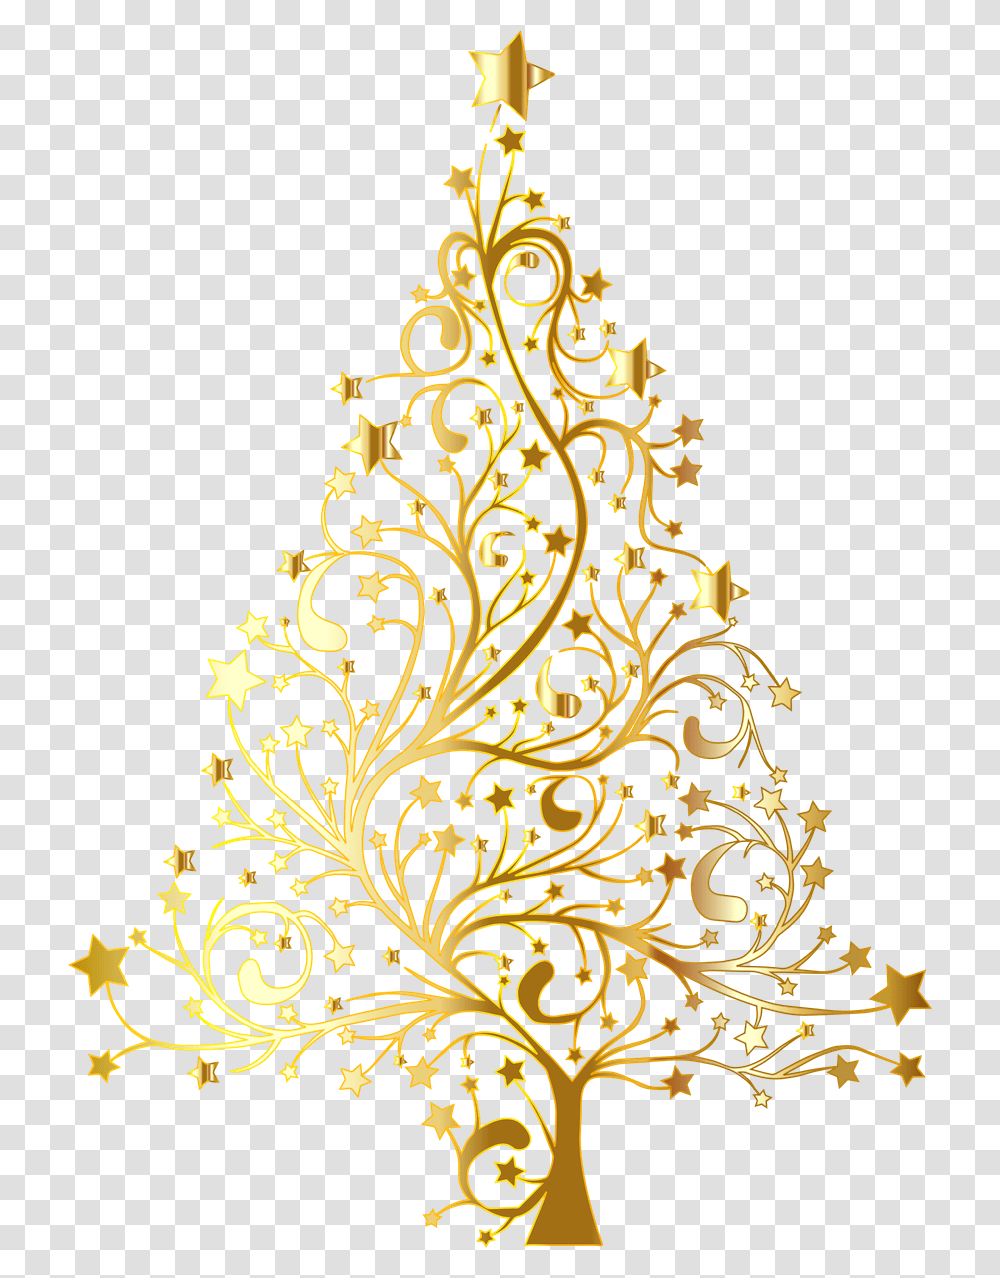 Starry Christmas Tree Gold No Christmas Tree Clipart White Background, Graphics, Floral Design, Pattern, Ornament Transparent Png